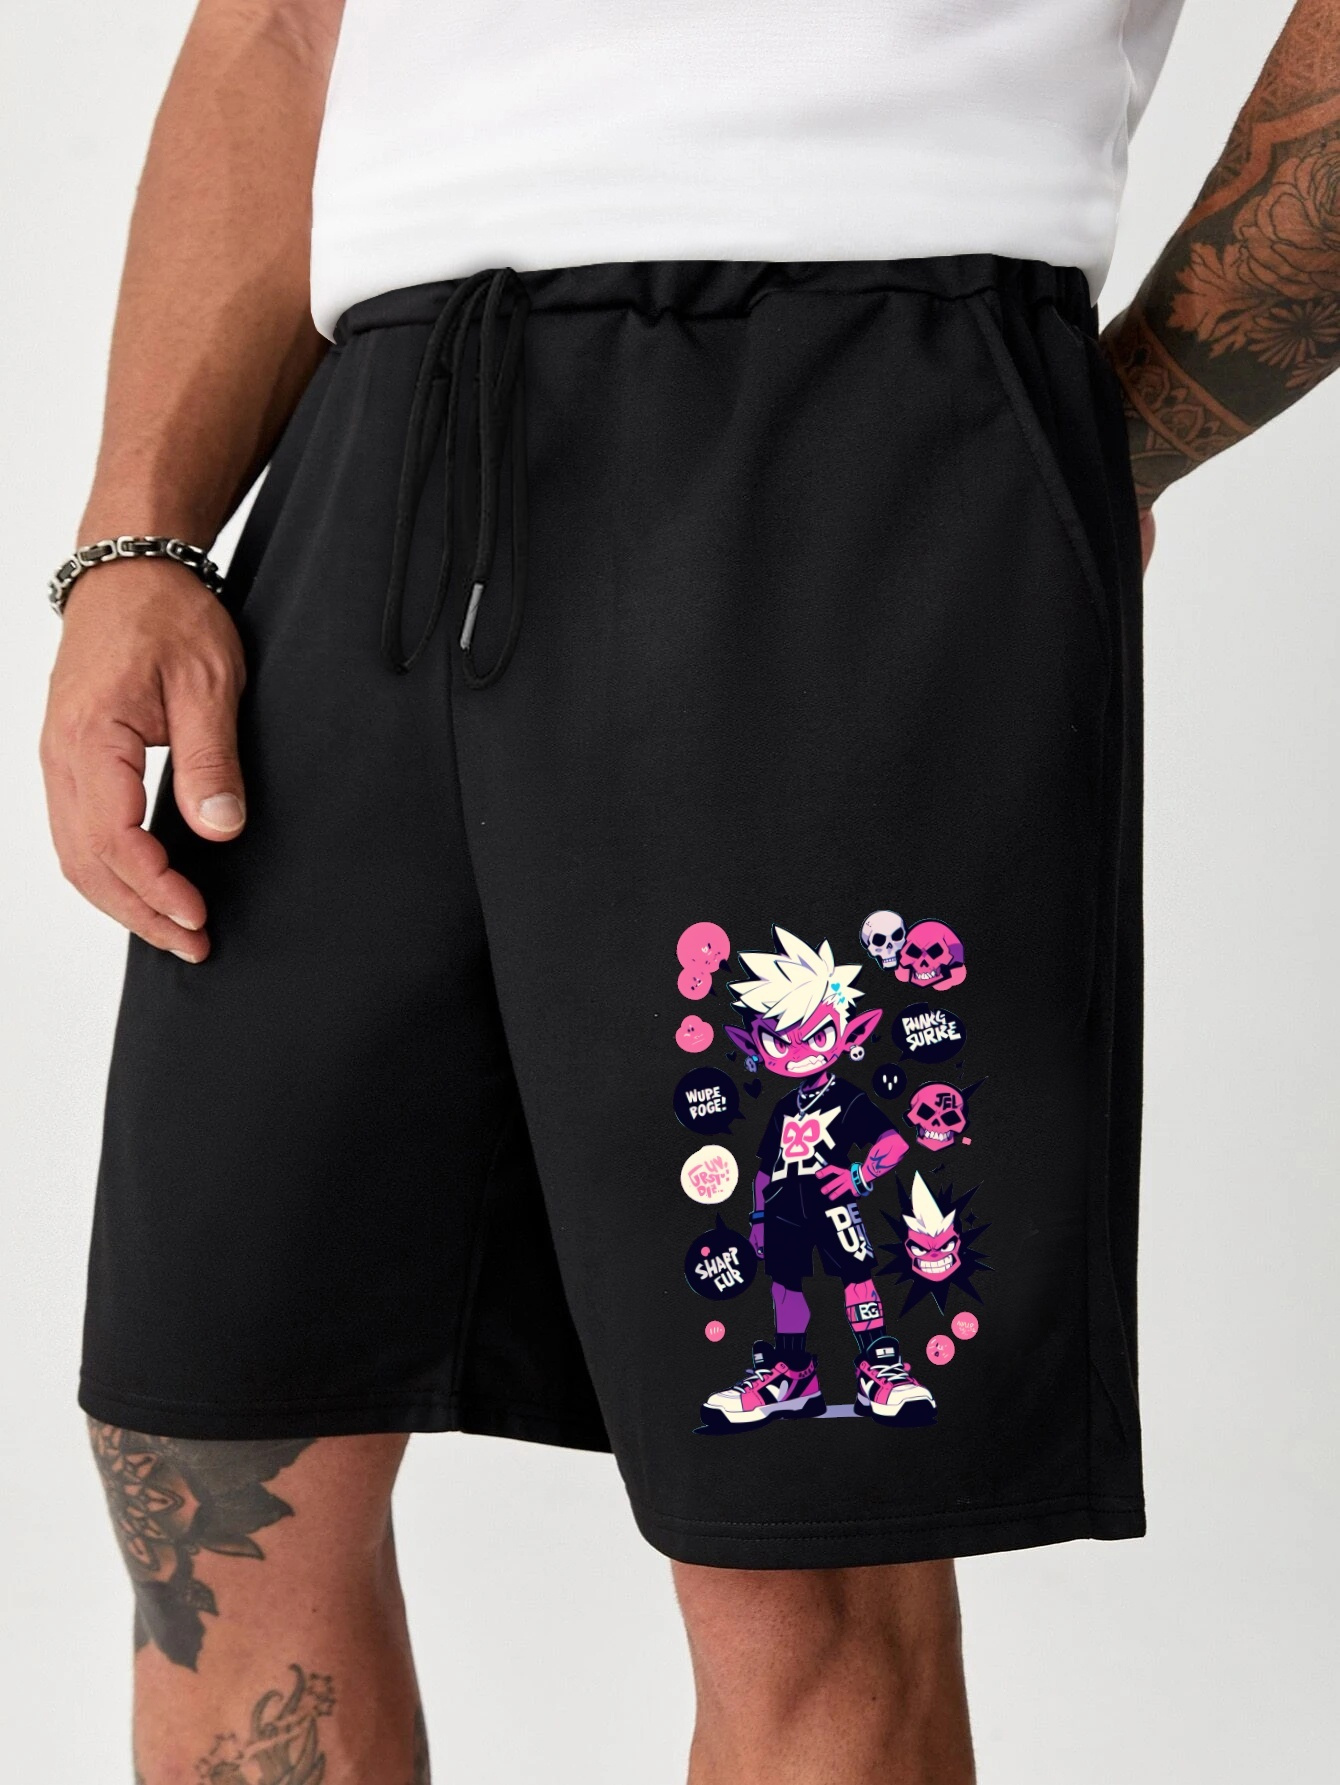 Anime Shorts Women's Athletic Shorts, Cute Shorts, Joggin Shorts, Anime  Gift, Gift for Her -  Canada